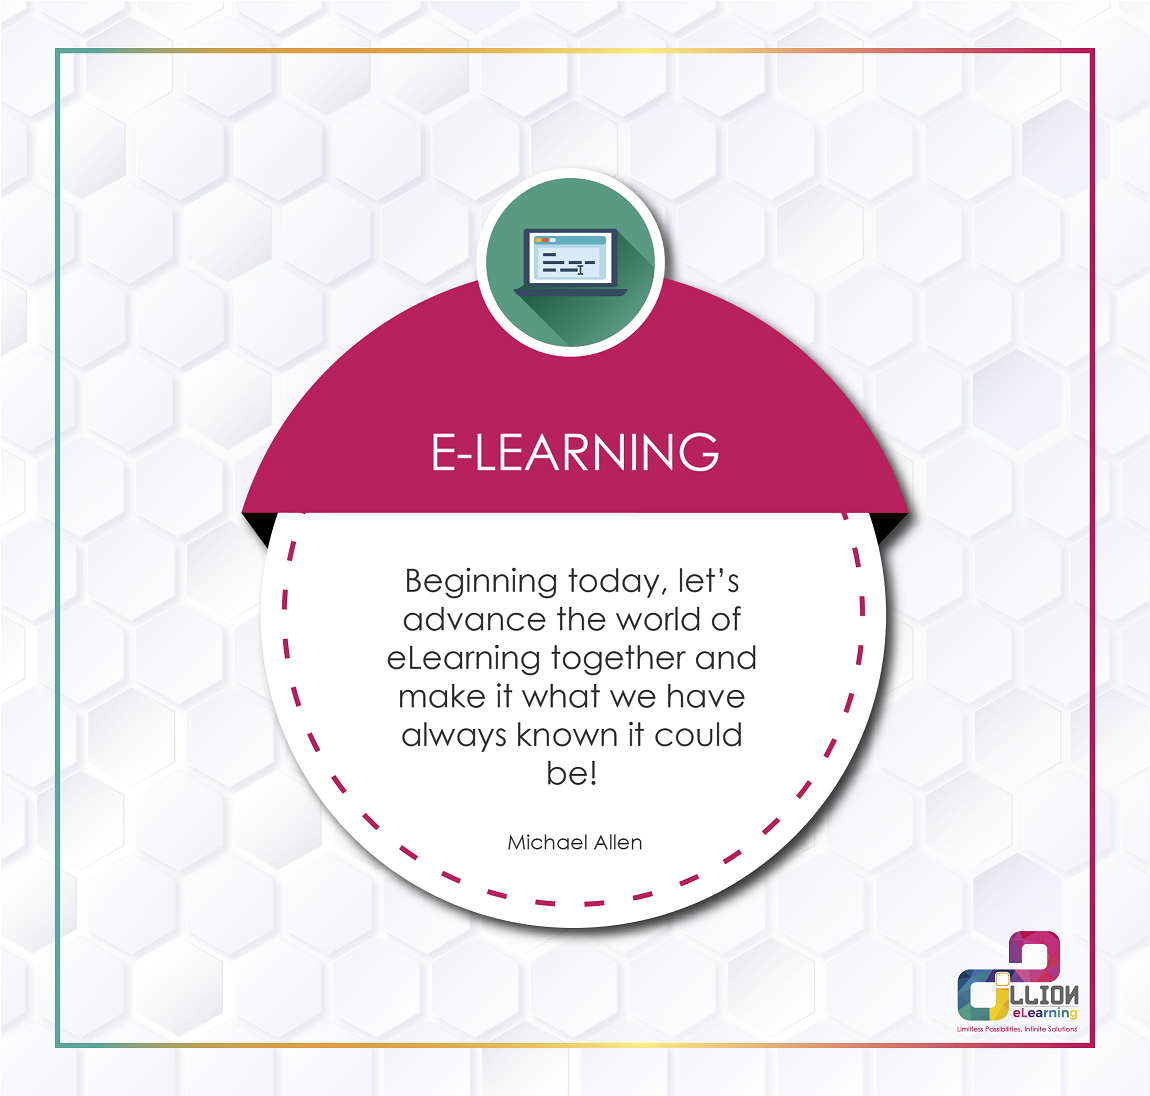 LEVELS OF INTERACTIVITY IN eLEARNING